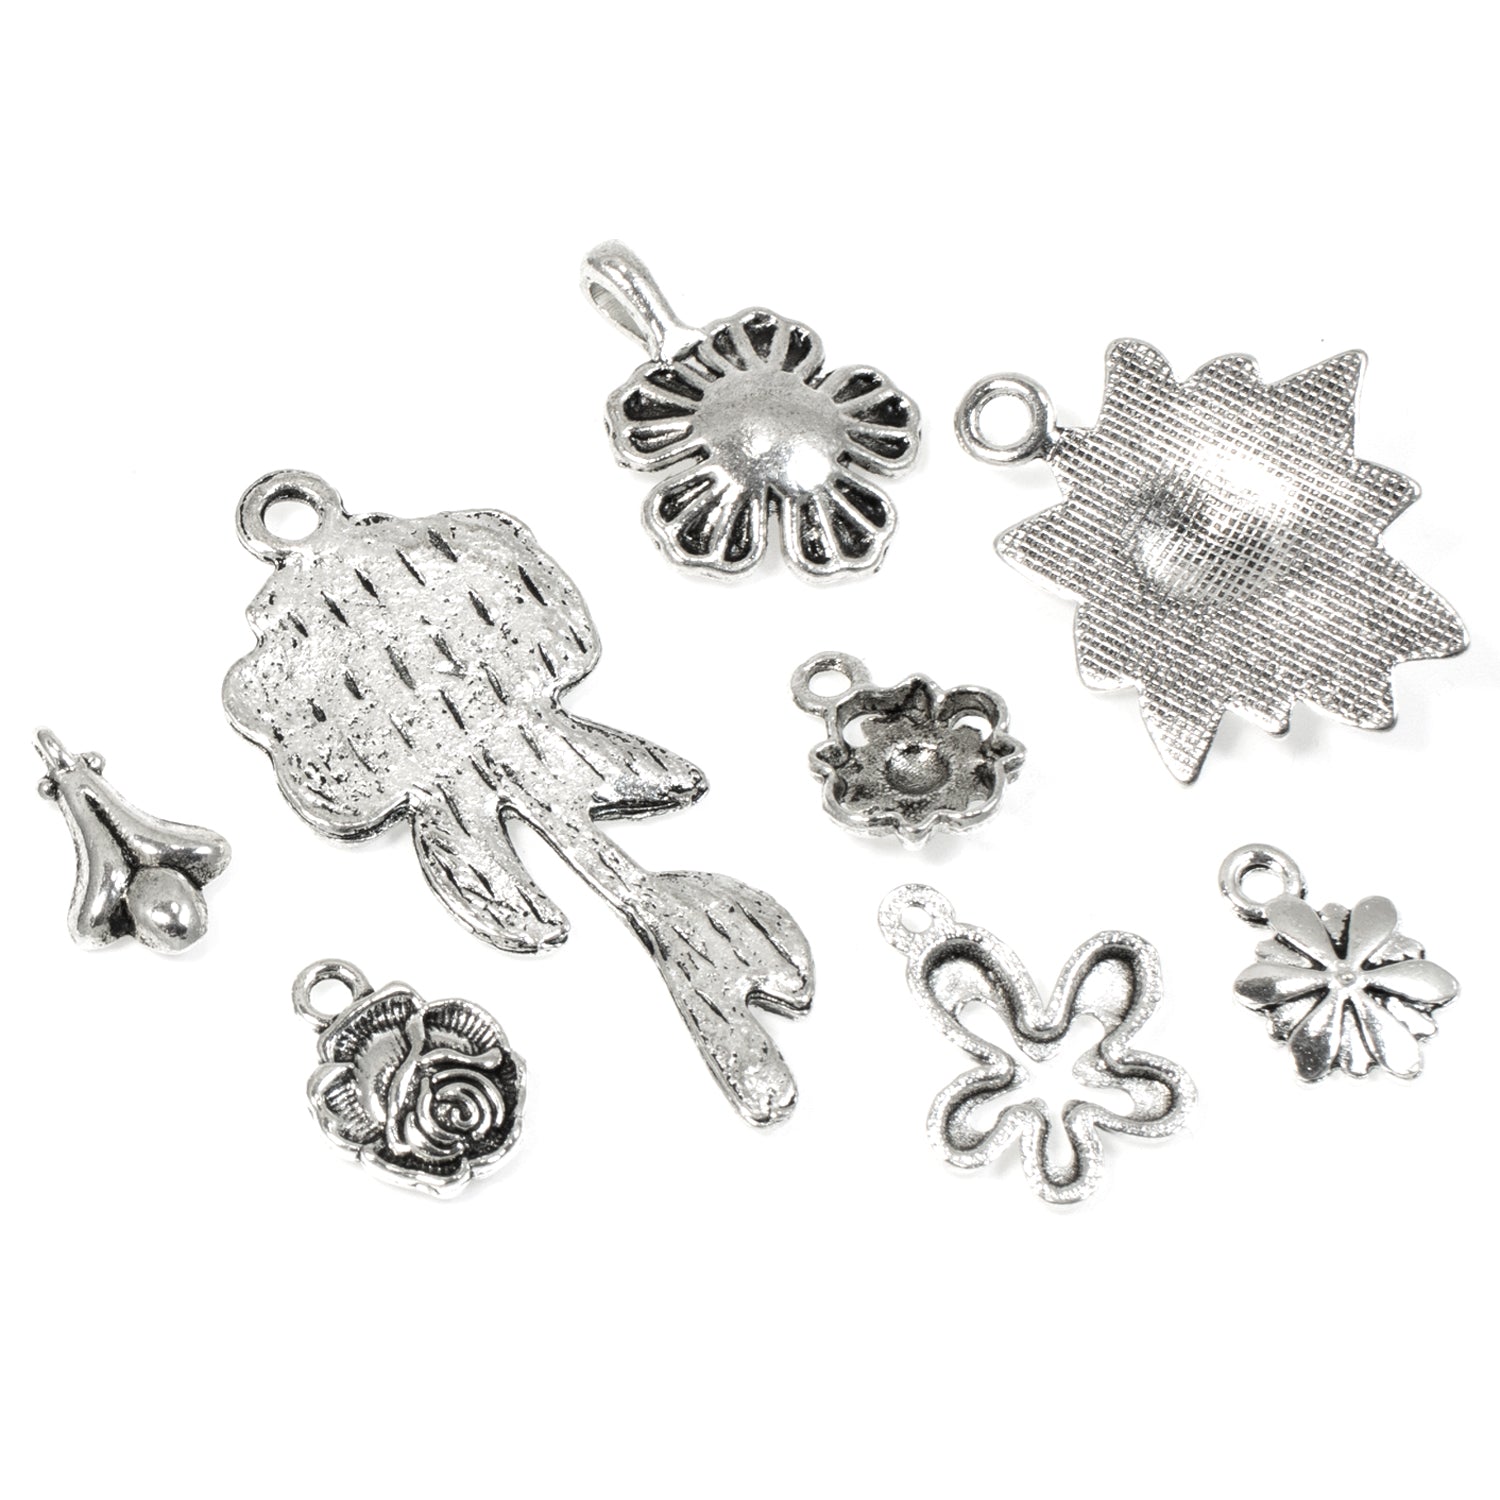 Silver Plated Brass Flower Charm, 44mm Flower Charm, Charms for Jewelry  Making, Nature Plant Flower Charms, Single Flower Charm for Pendants 